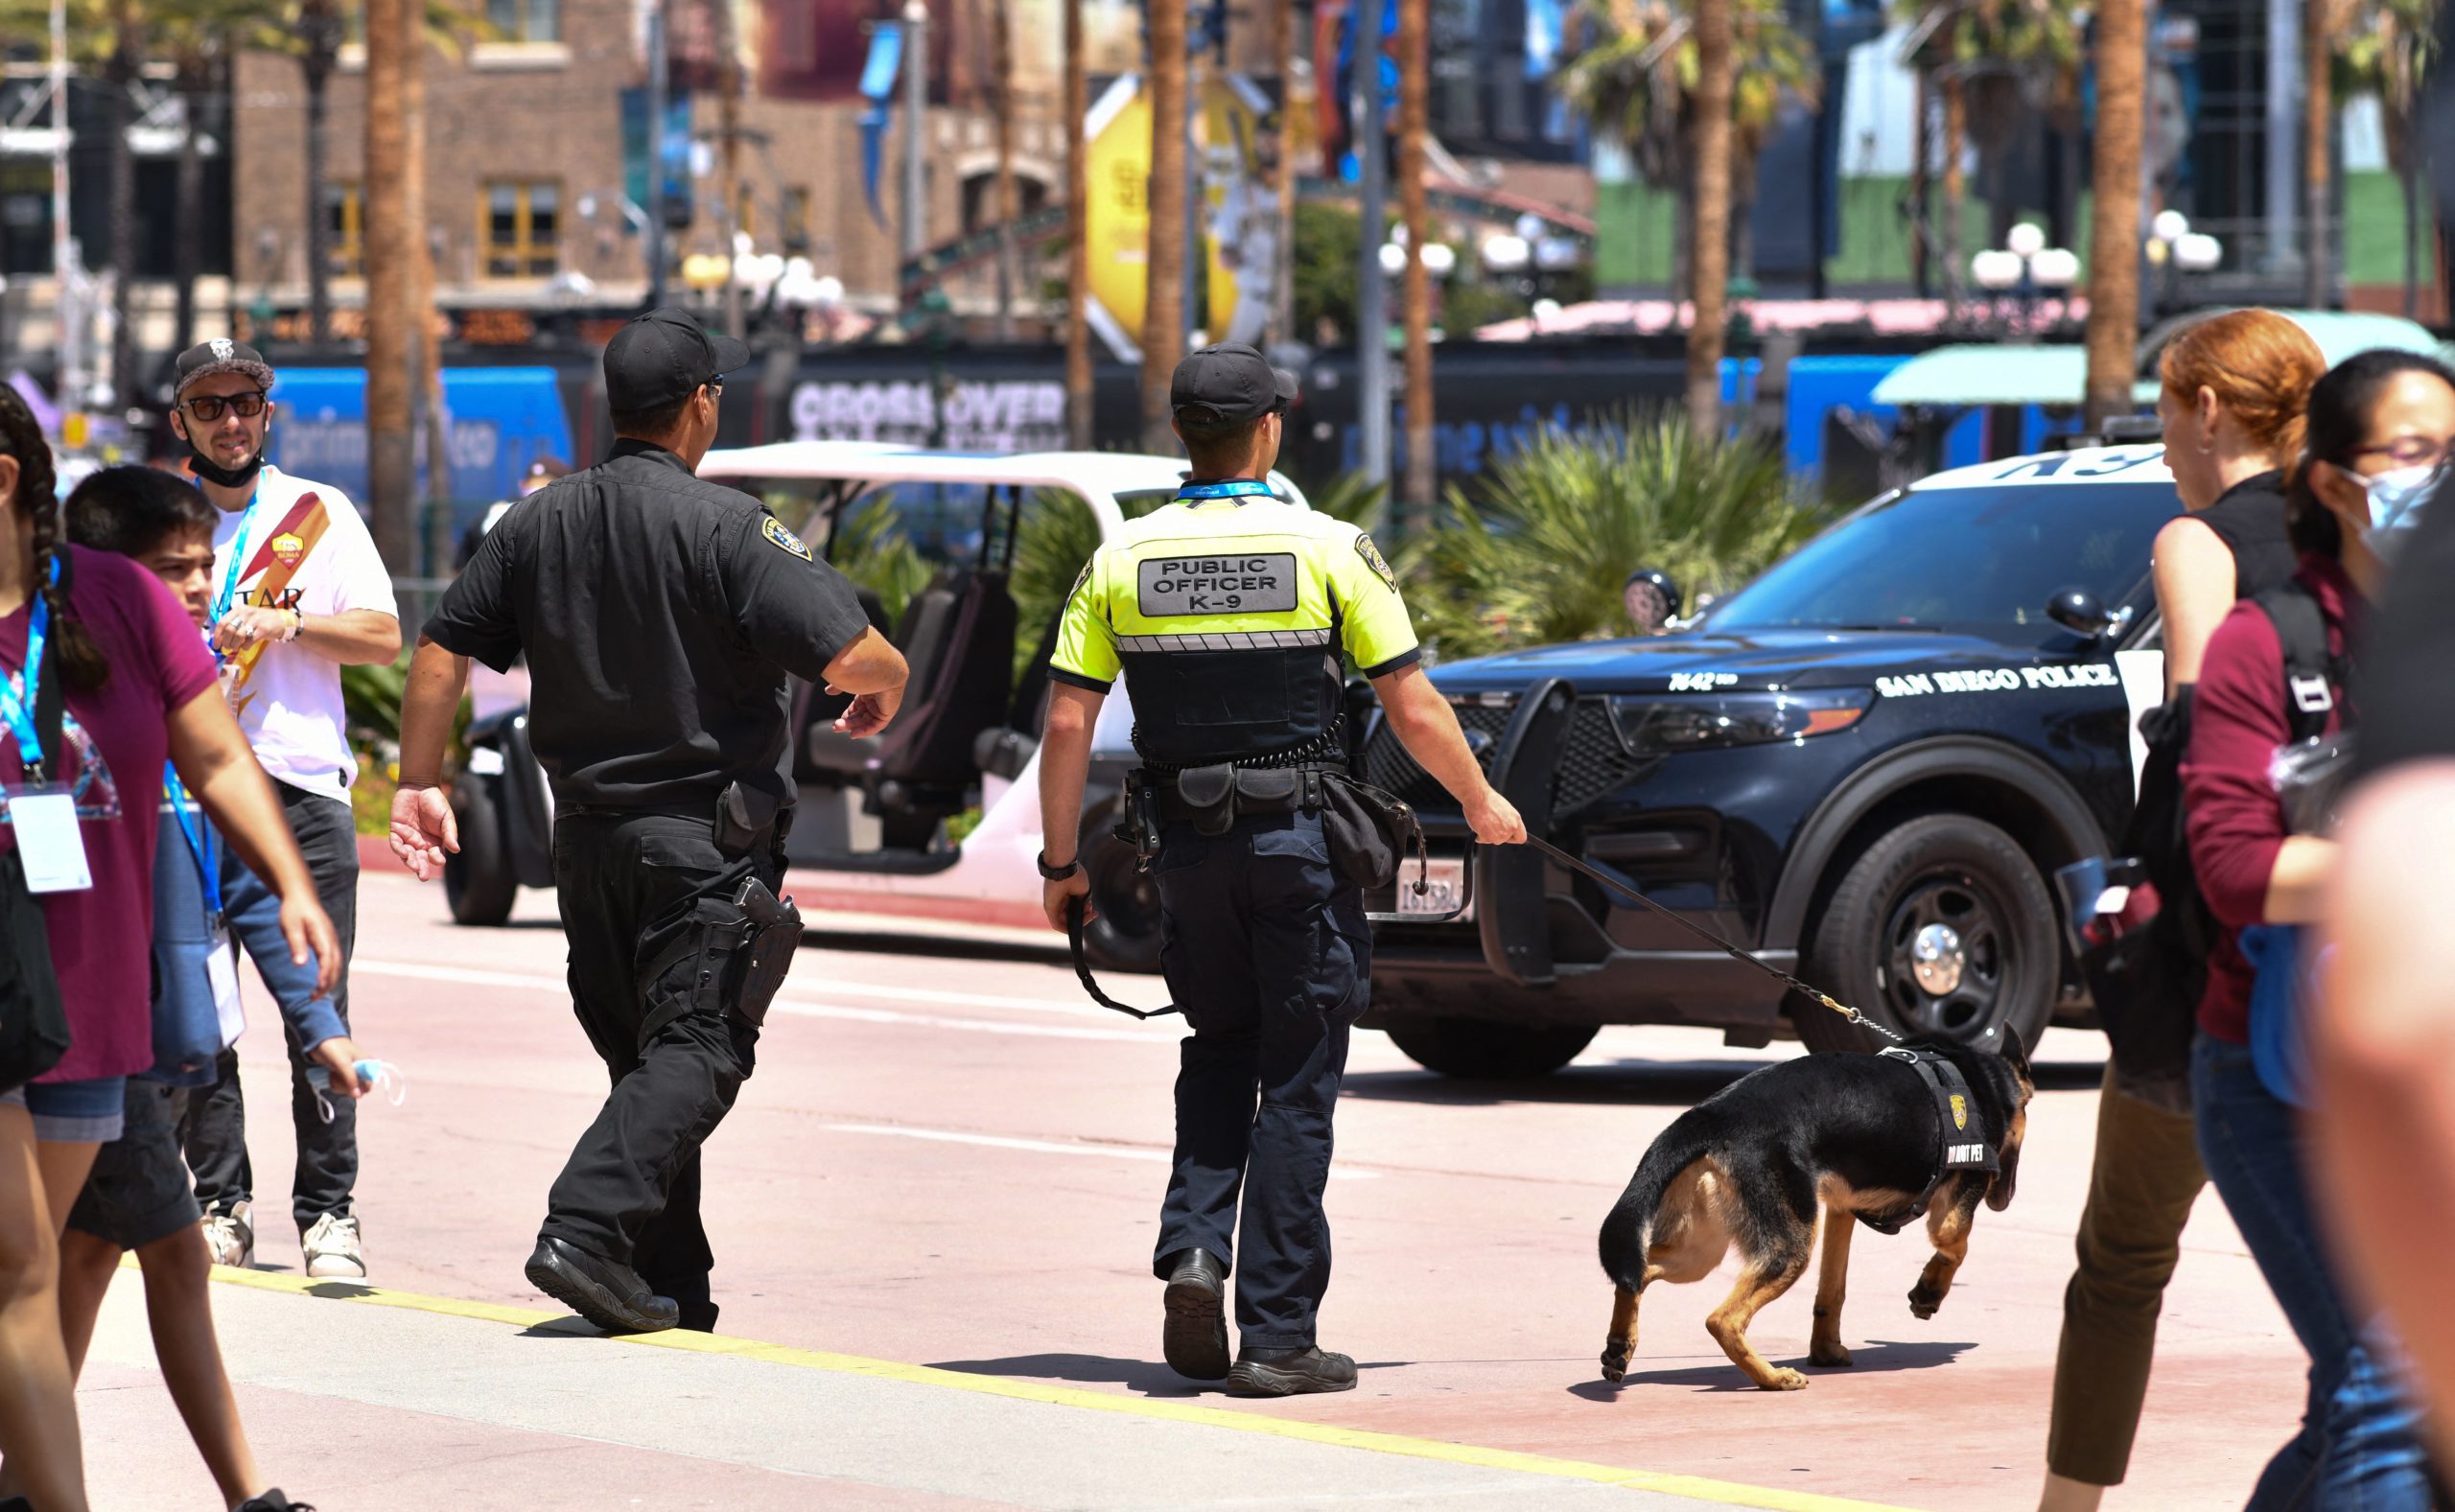 Police officers from the K-9 unit patrol in front of the convention center during San Diego Comic-Con International in San Diego, California, on July 24, 2022. (Photo by Chris Delmas / AFP) (Photo by CHRIS DELMAS/AFP via Getty Images)